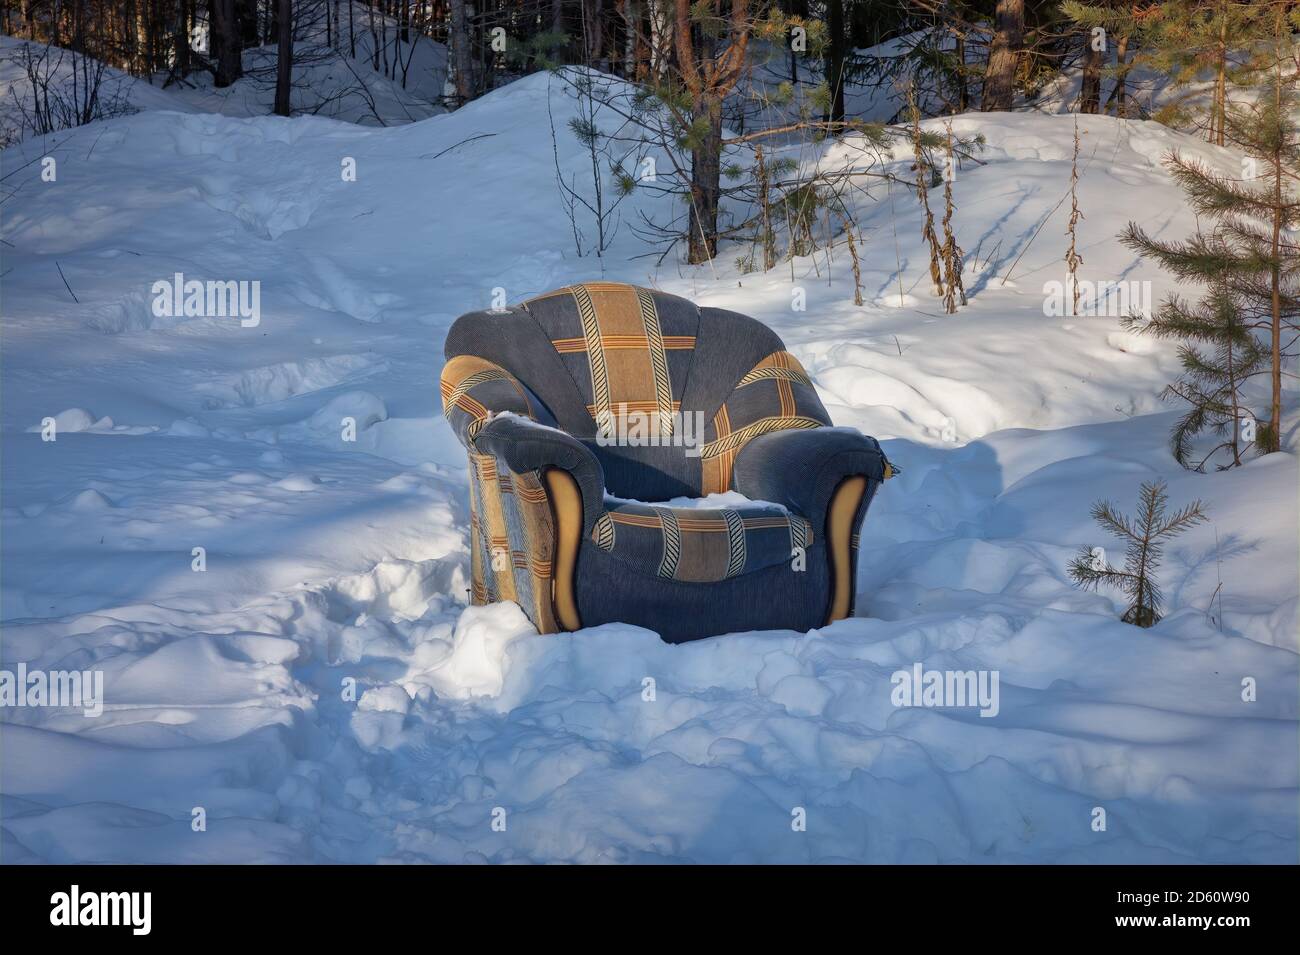 An easy chair stands in a snowy forest. Stock Photo